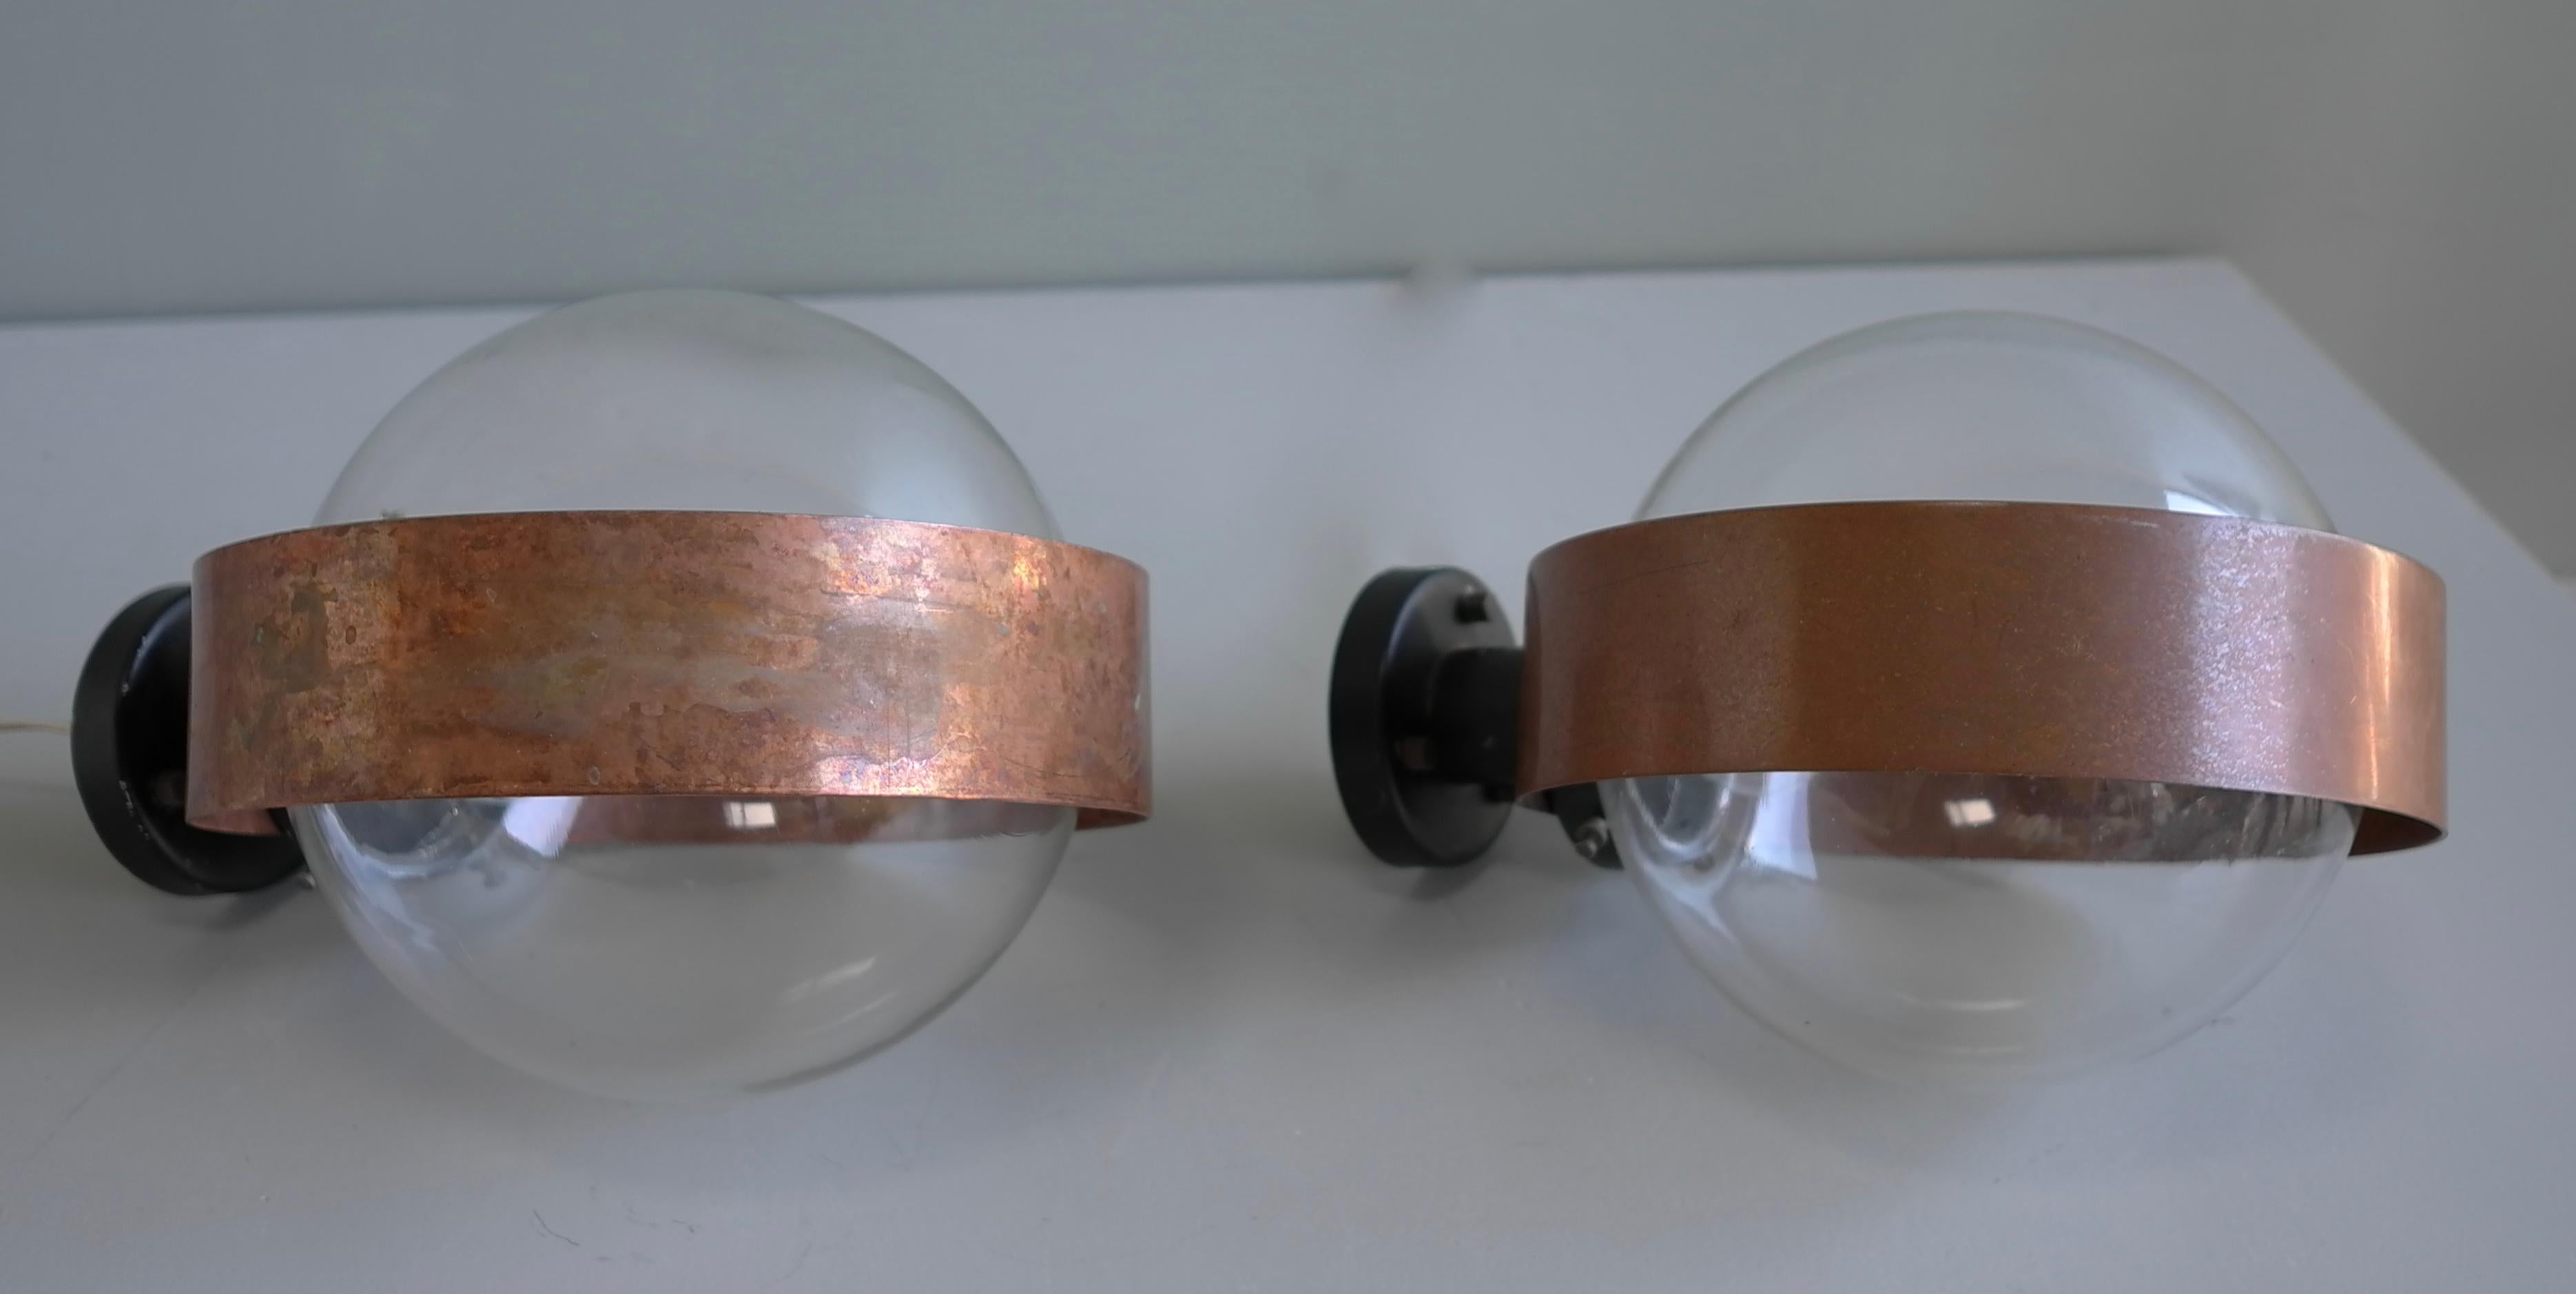 Pair of Scandinavian Glass Ball Wall lamps with Copper Patina Rims, 1960's For Sale 12